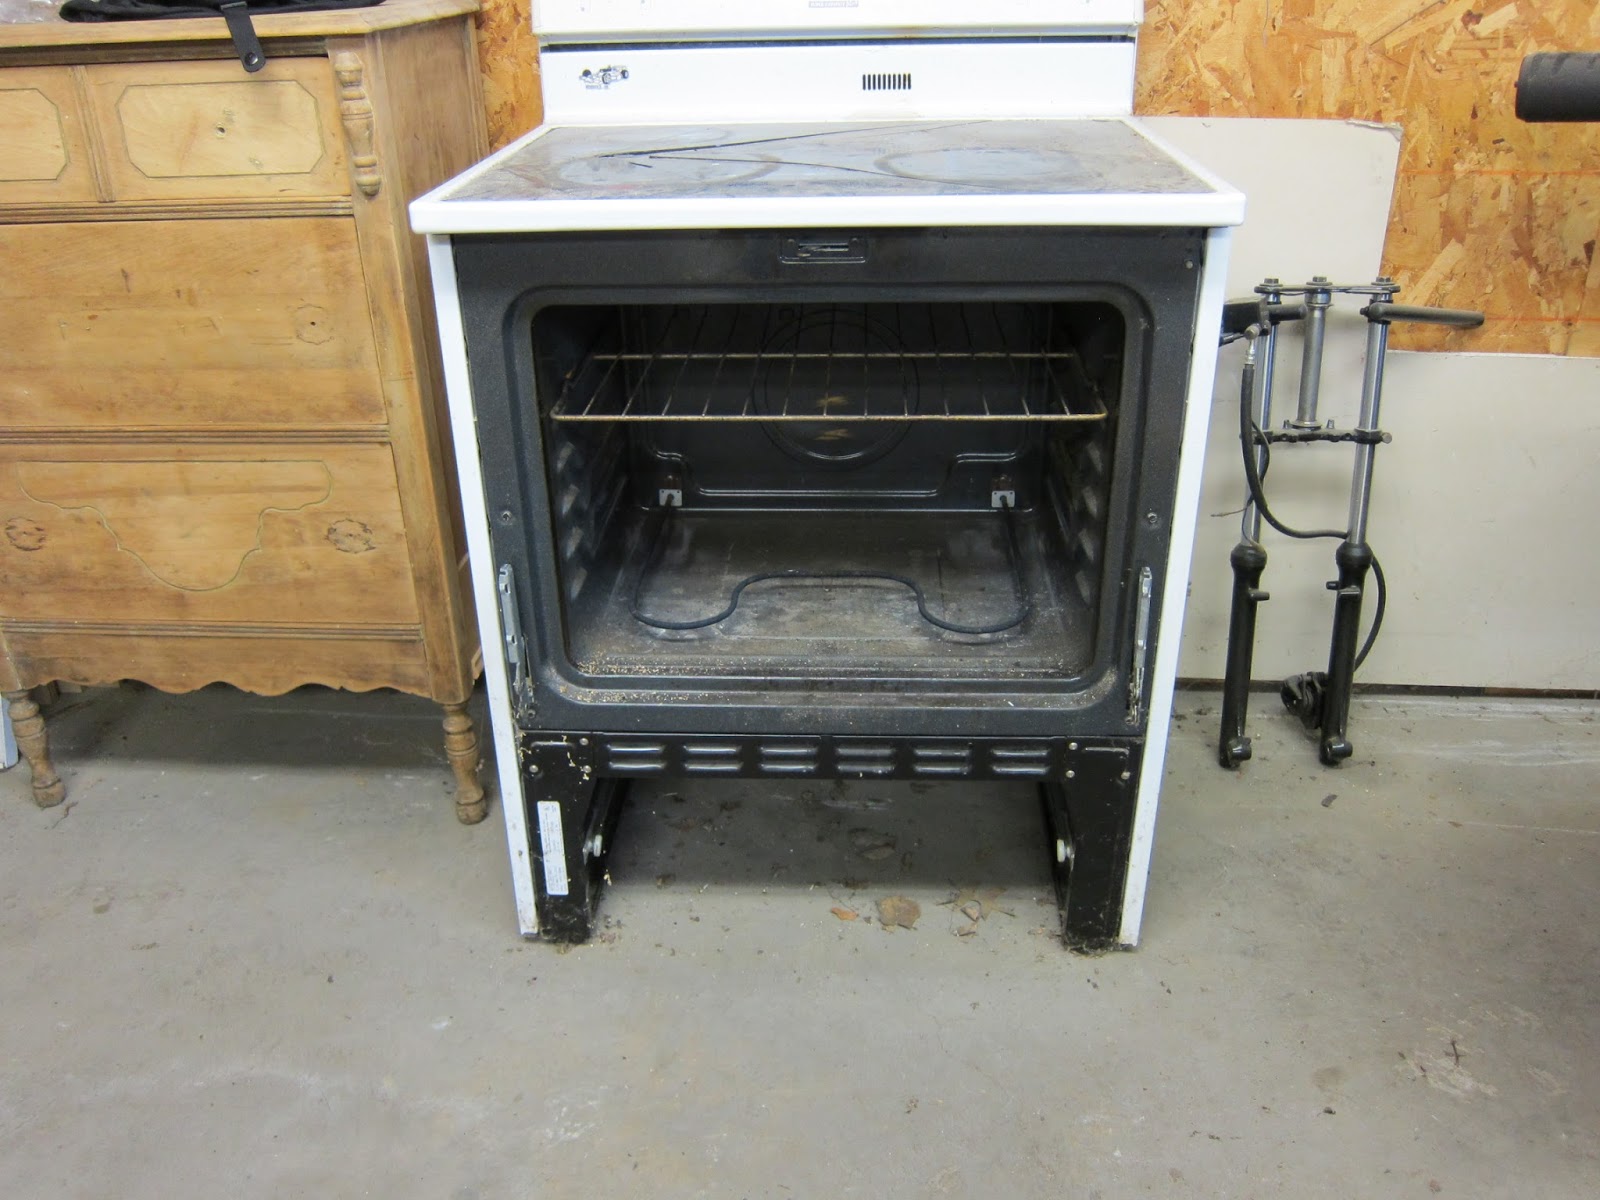 Large Cheap Powder Coat Oven Made From Kitchen Oven step by step